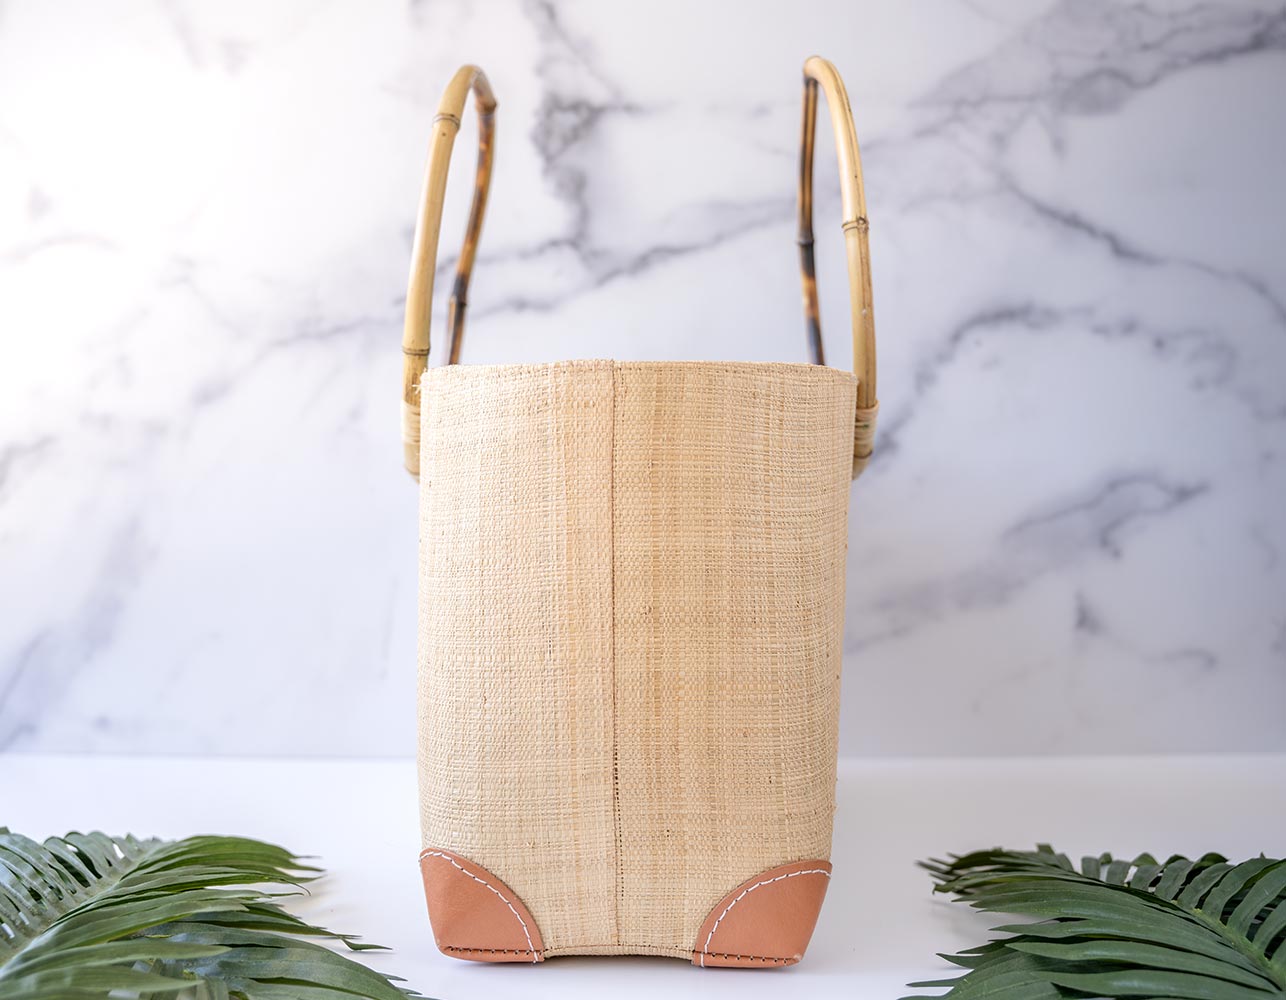 End View of the Shebobo Bebe Straw Bag with Bamboo Handles